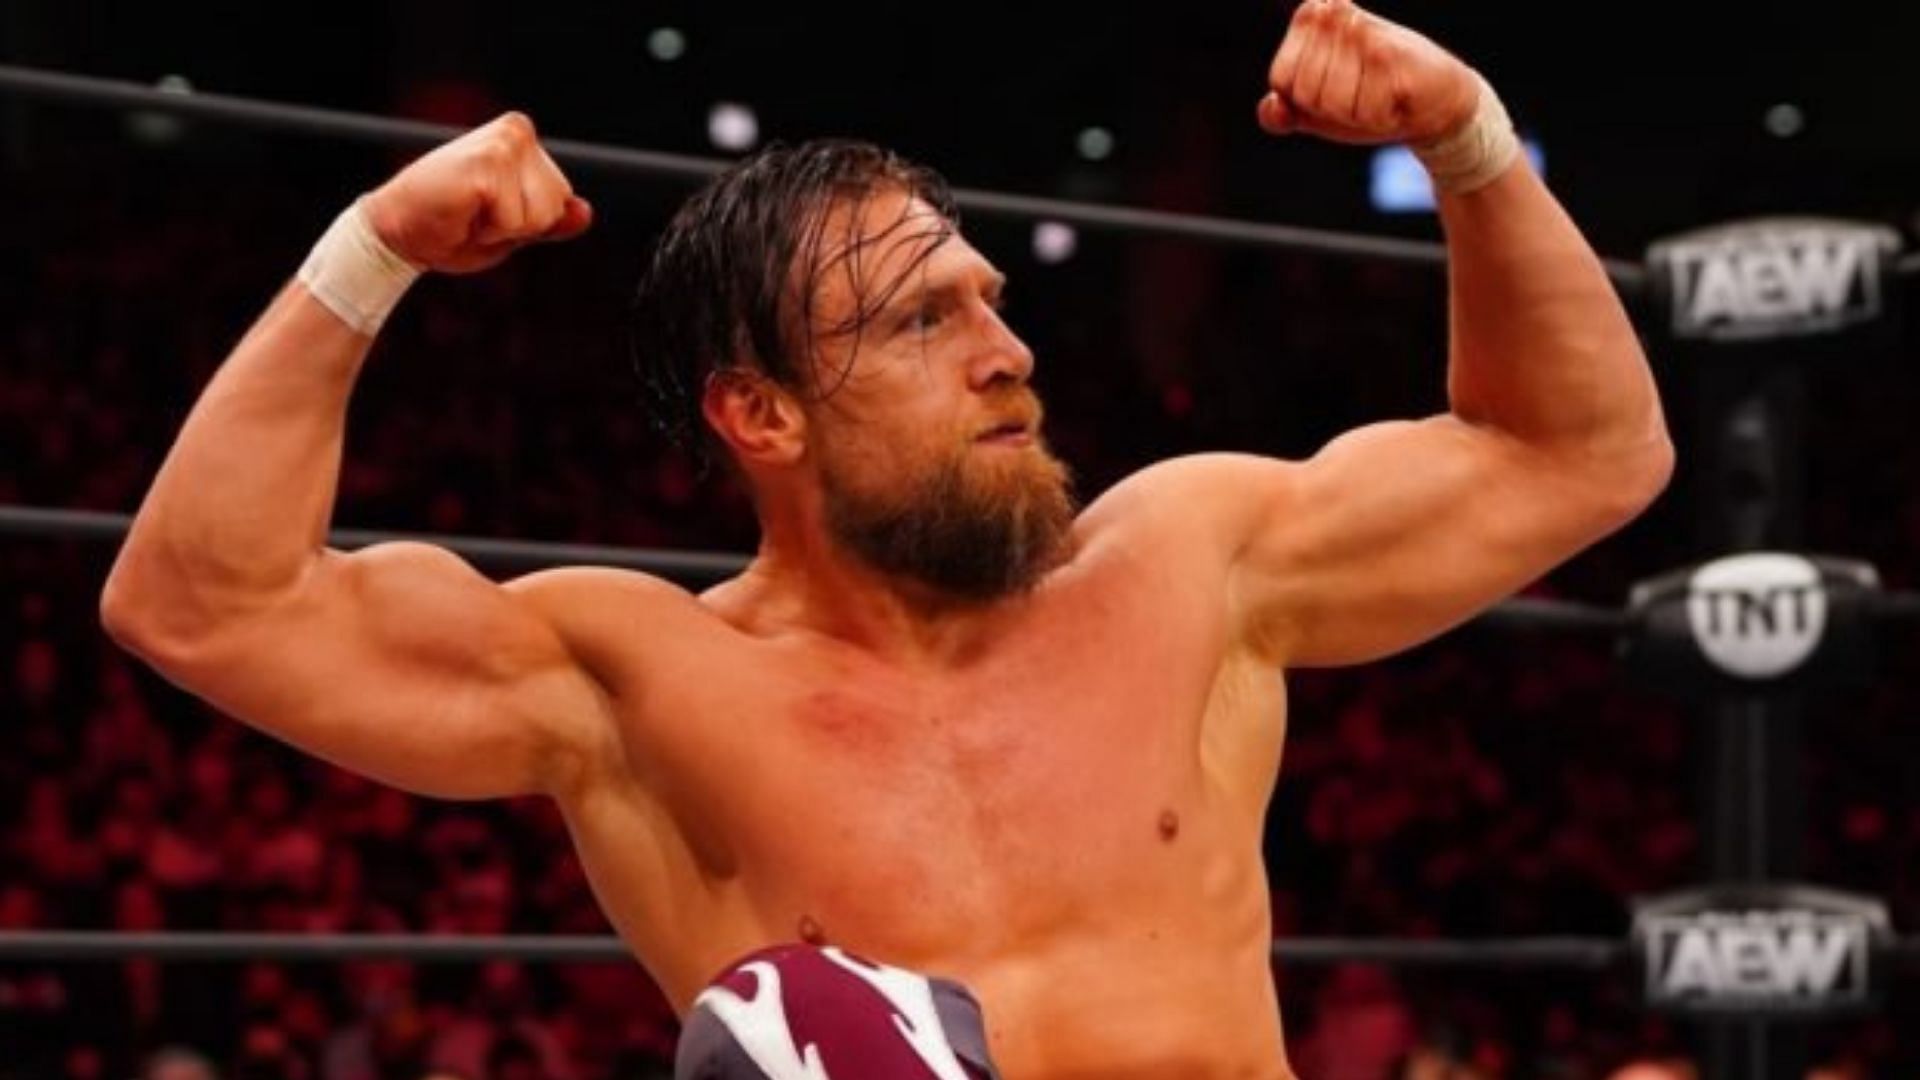 Bryan Danielson at an AEW event in 2021